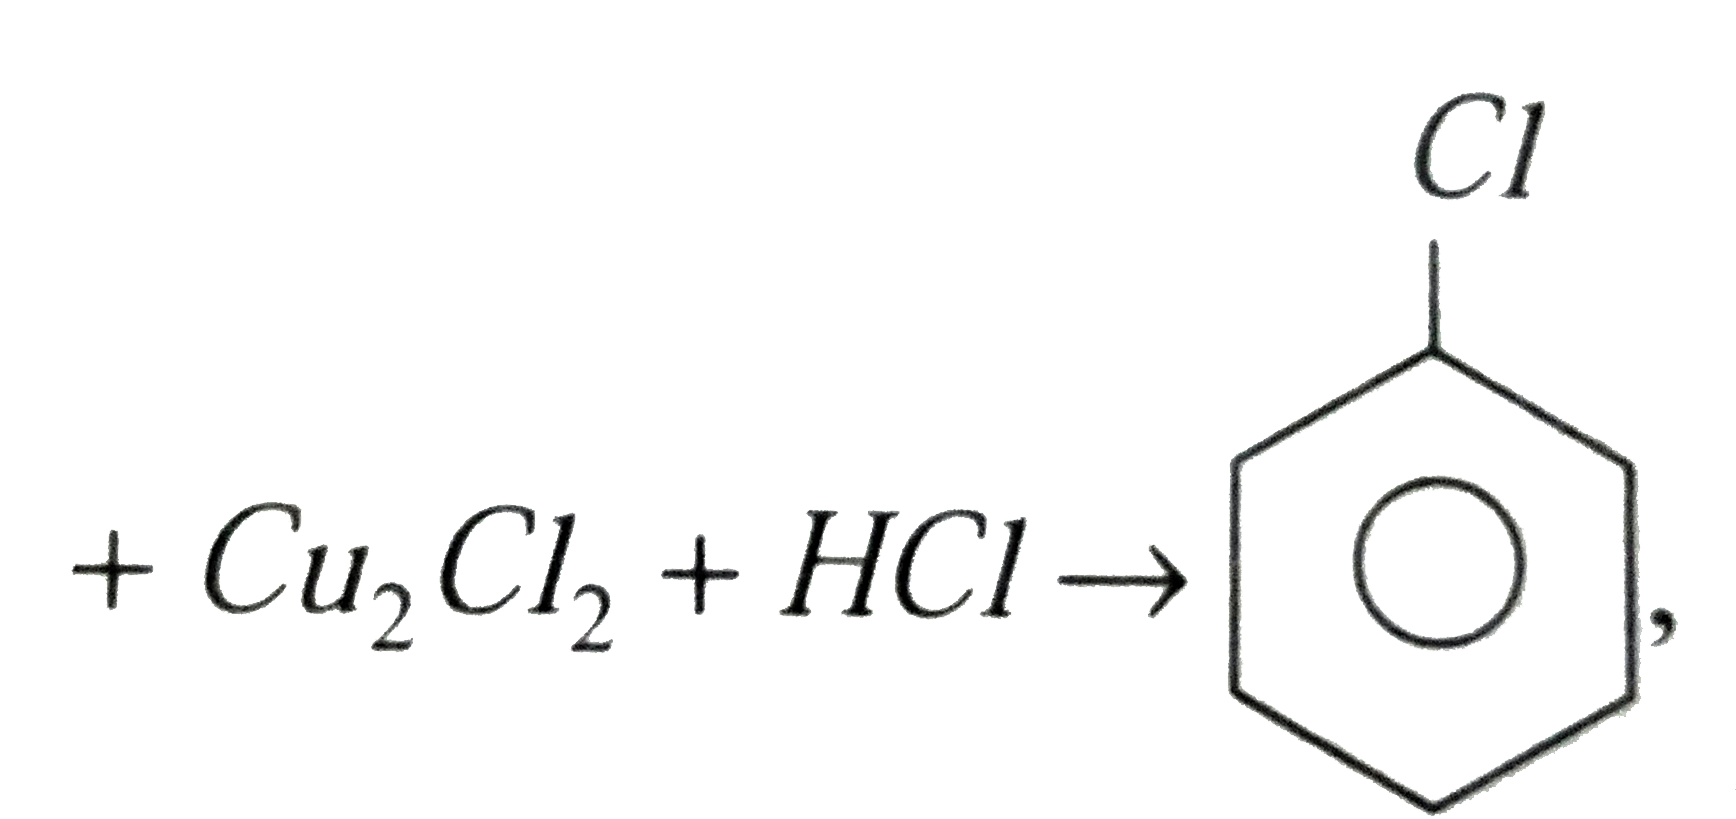 Diazonium salts , the reaction is known as